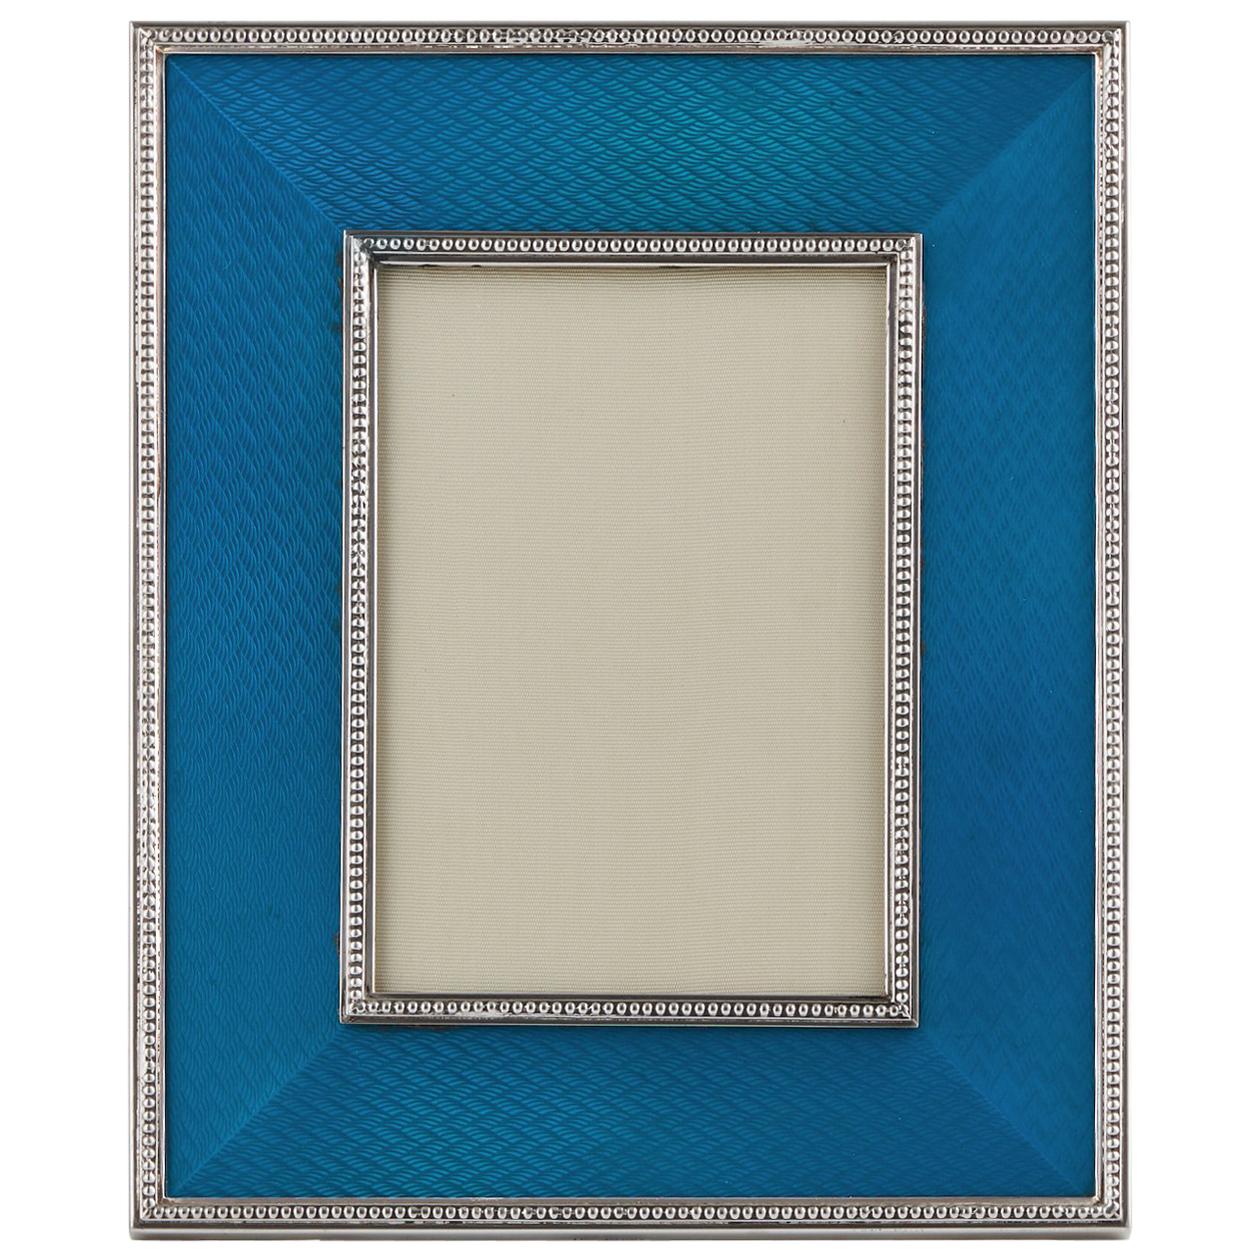 Mid-20th C  Sterling Silver & Enamel Vintage Photo Frame by Christian Dior 1970